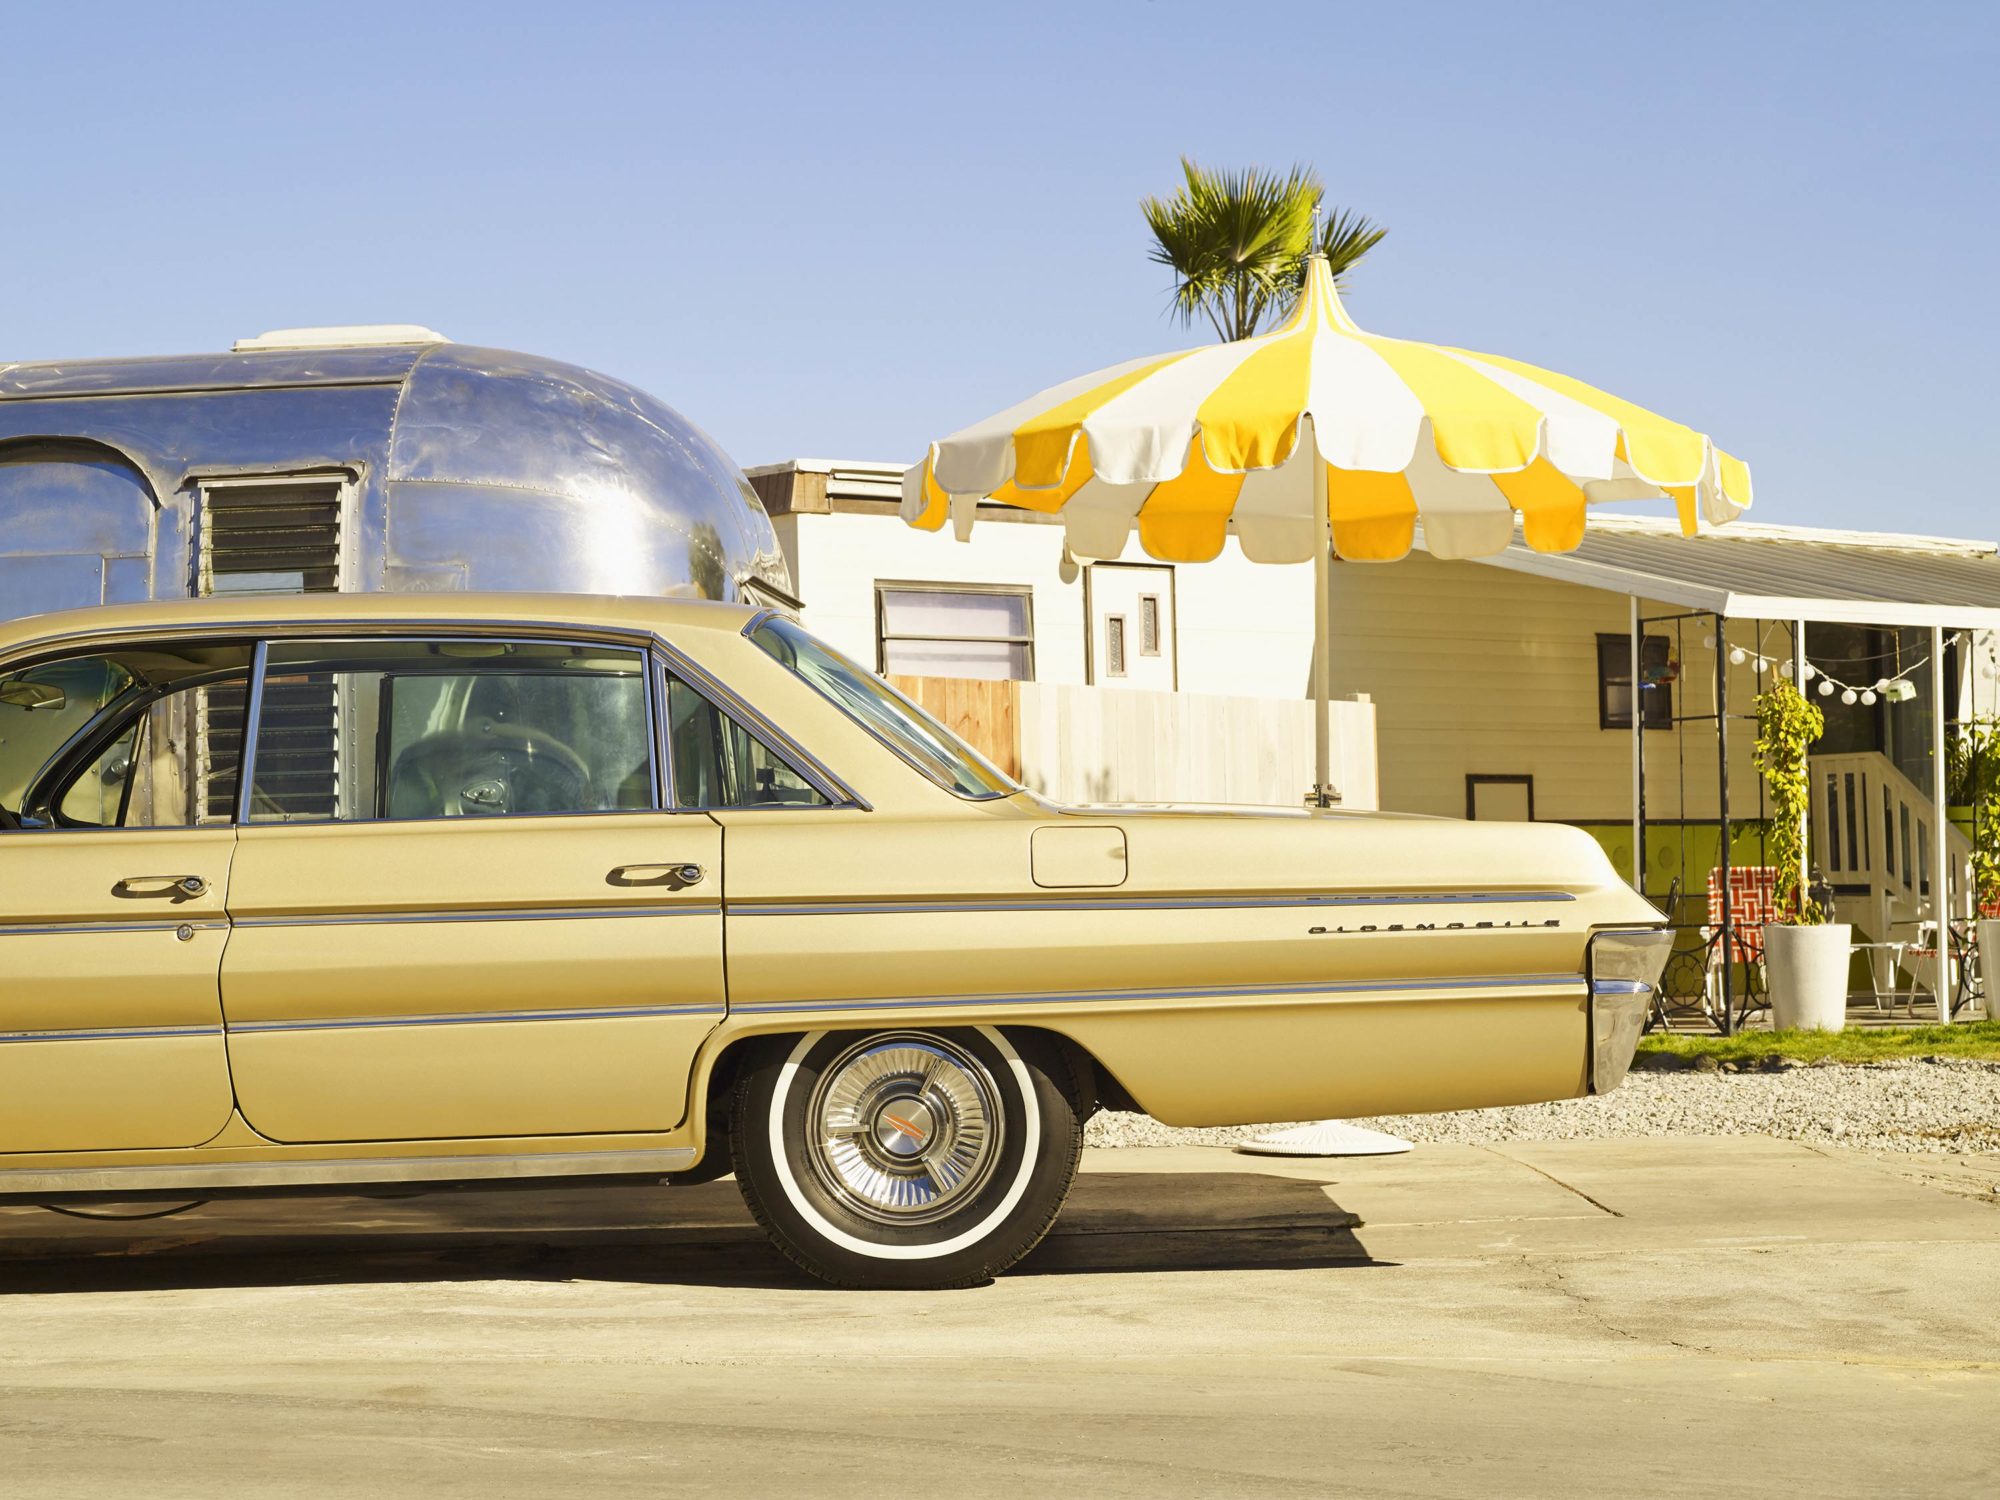 Oldsmobile In The Trailerpark - I Heart Palm Springs Collection - Fine Art Photography by Toby Dixon